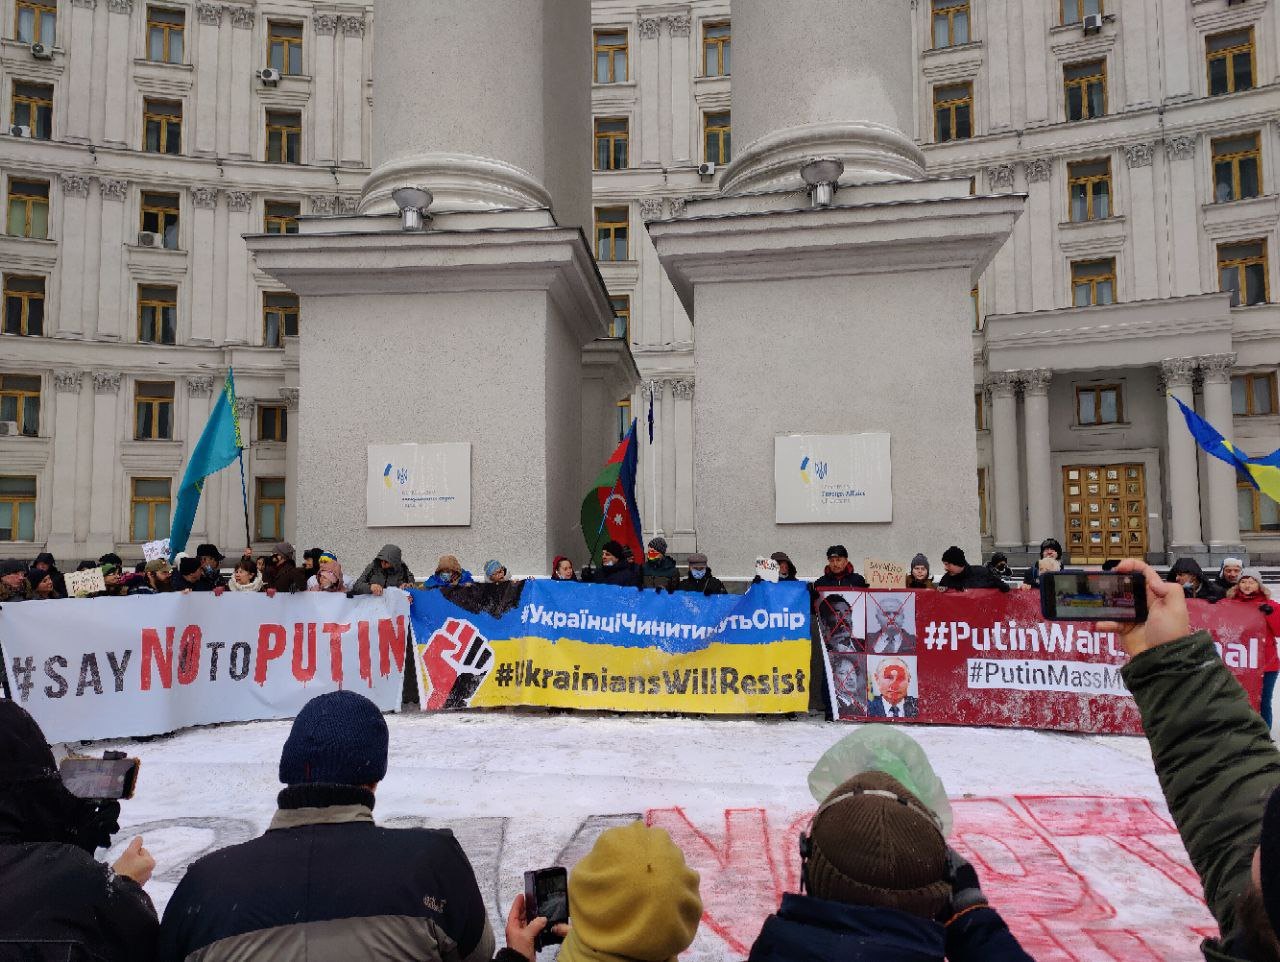 Ahead of Russia U.S. talks, worldwide rally demands “a clear no to Putin’s imperial policy”